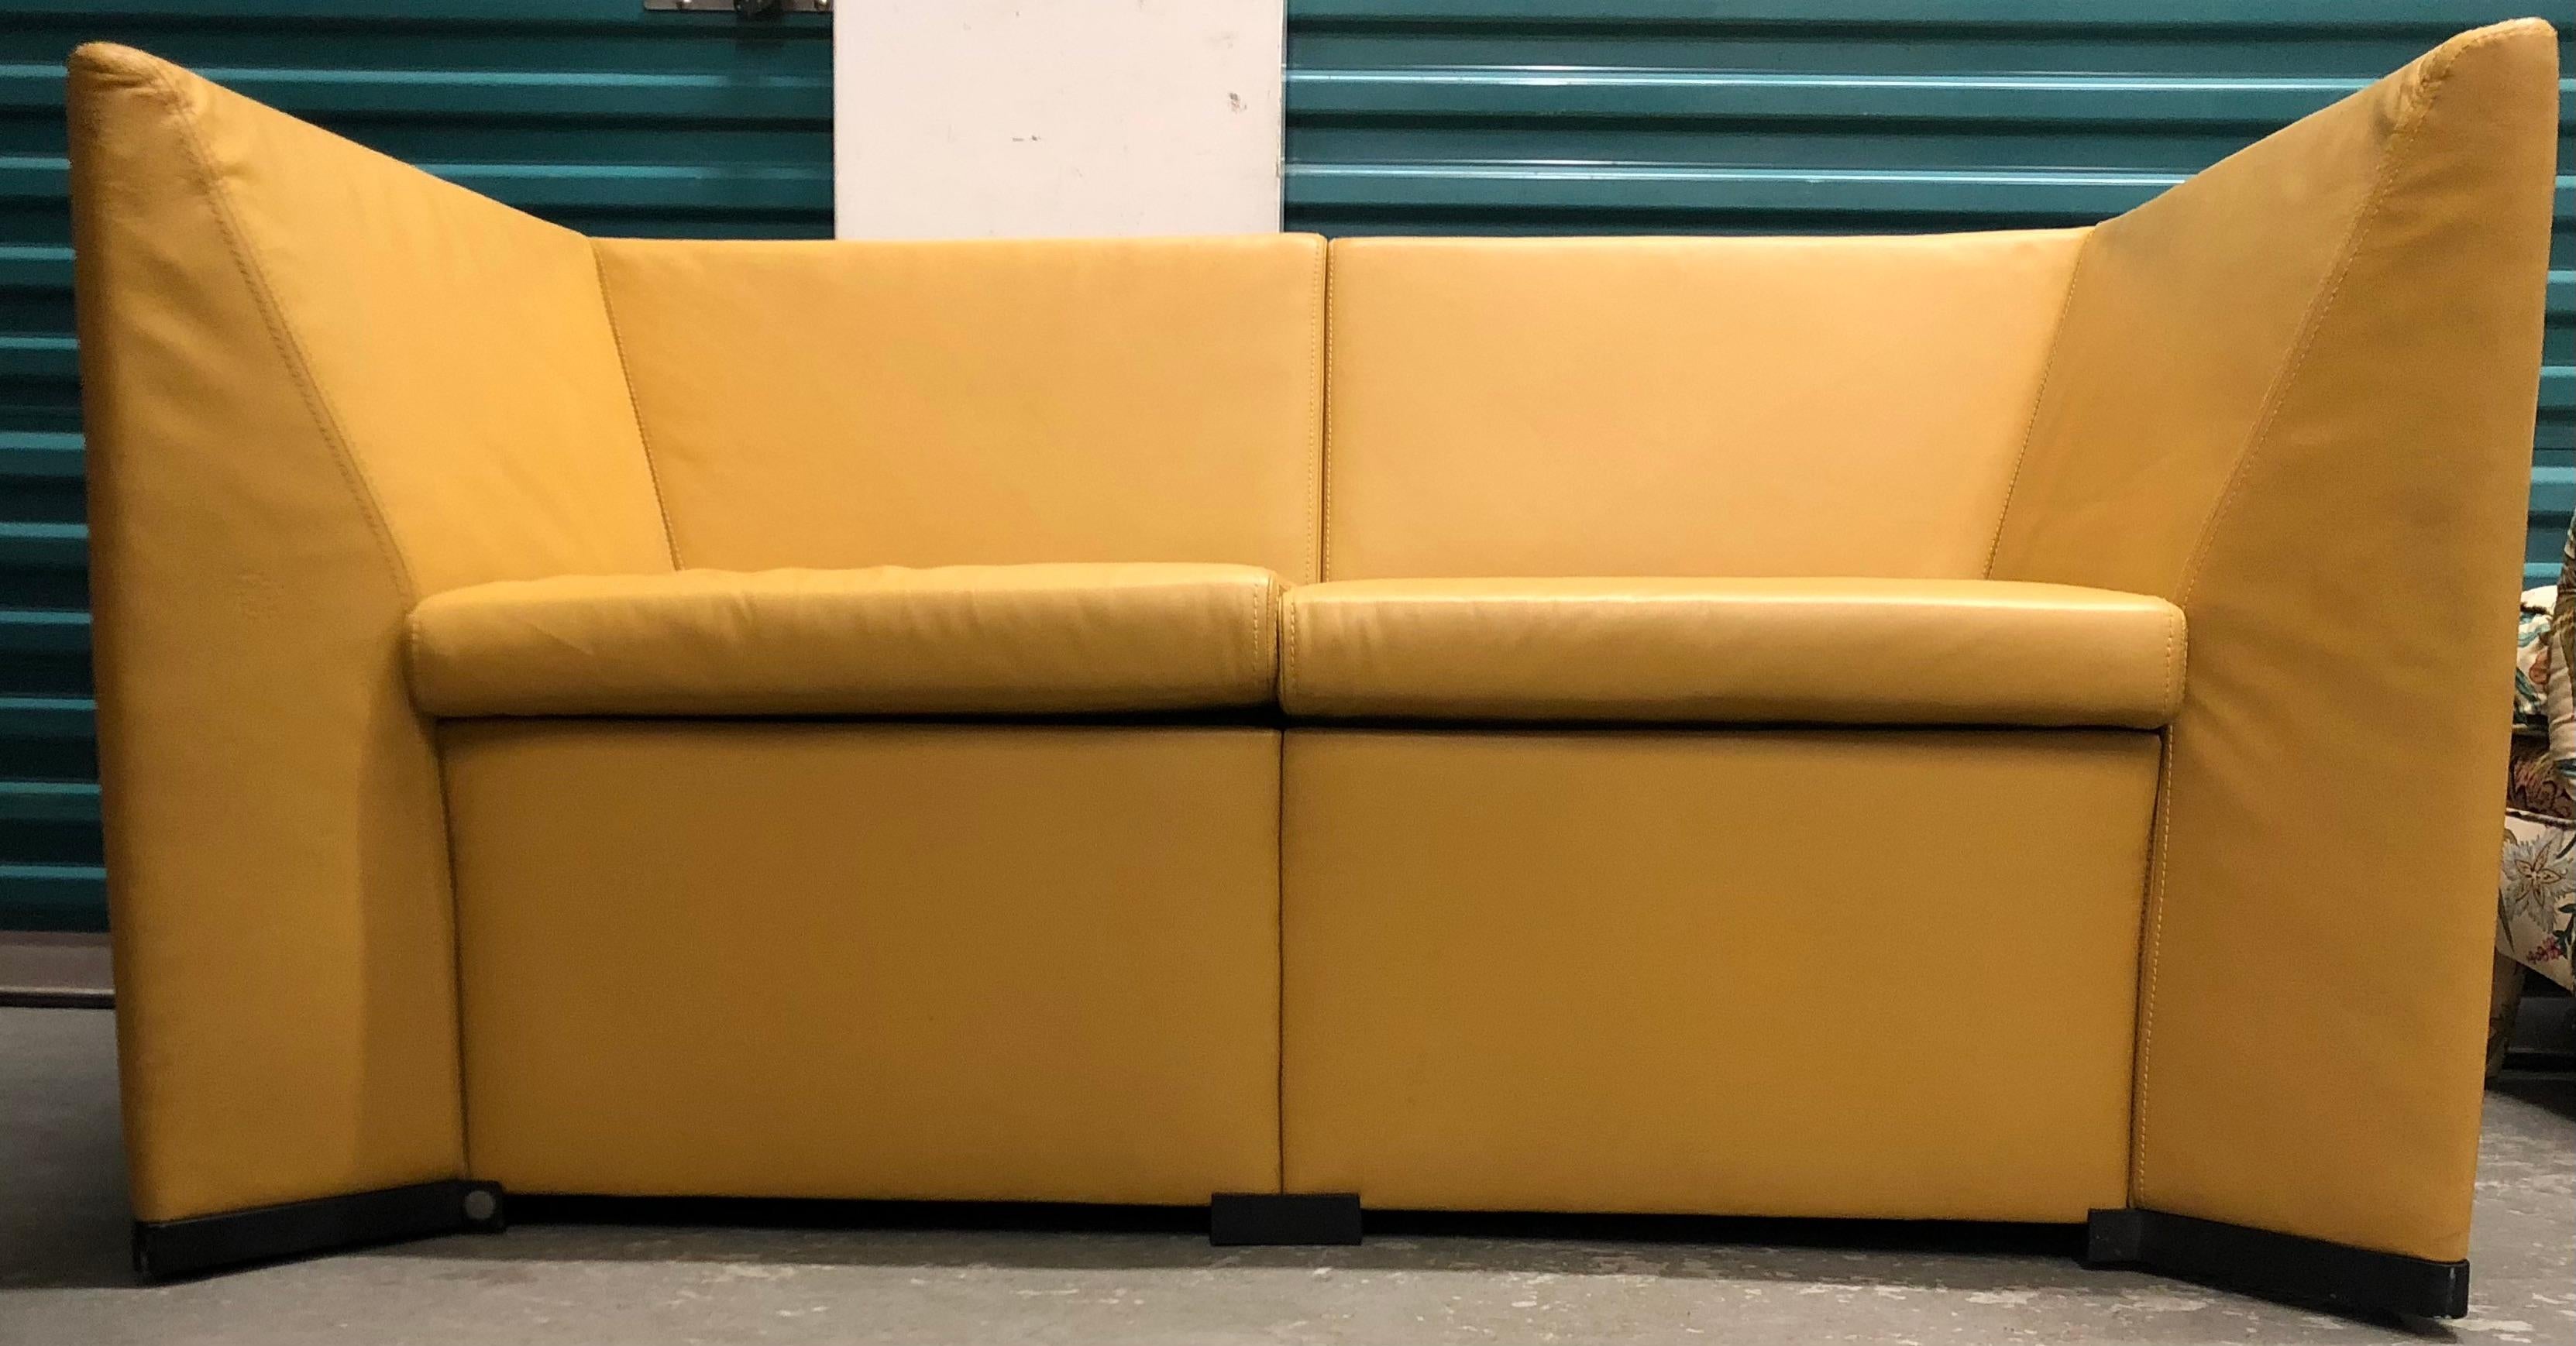 Yellow leather loveseat two-seat sofa Osvaldo Borsani Italian Modern. Rare leather loveseat designed by the Centro Progetti lead by Osvaldo Borsani for the famed Tecno Company (SPA) Italy. Tecno was founded in in 1952.
Dimensions: 54